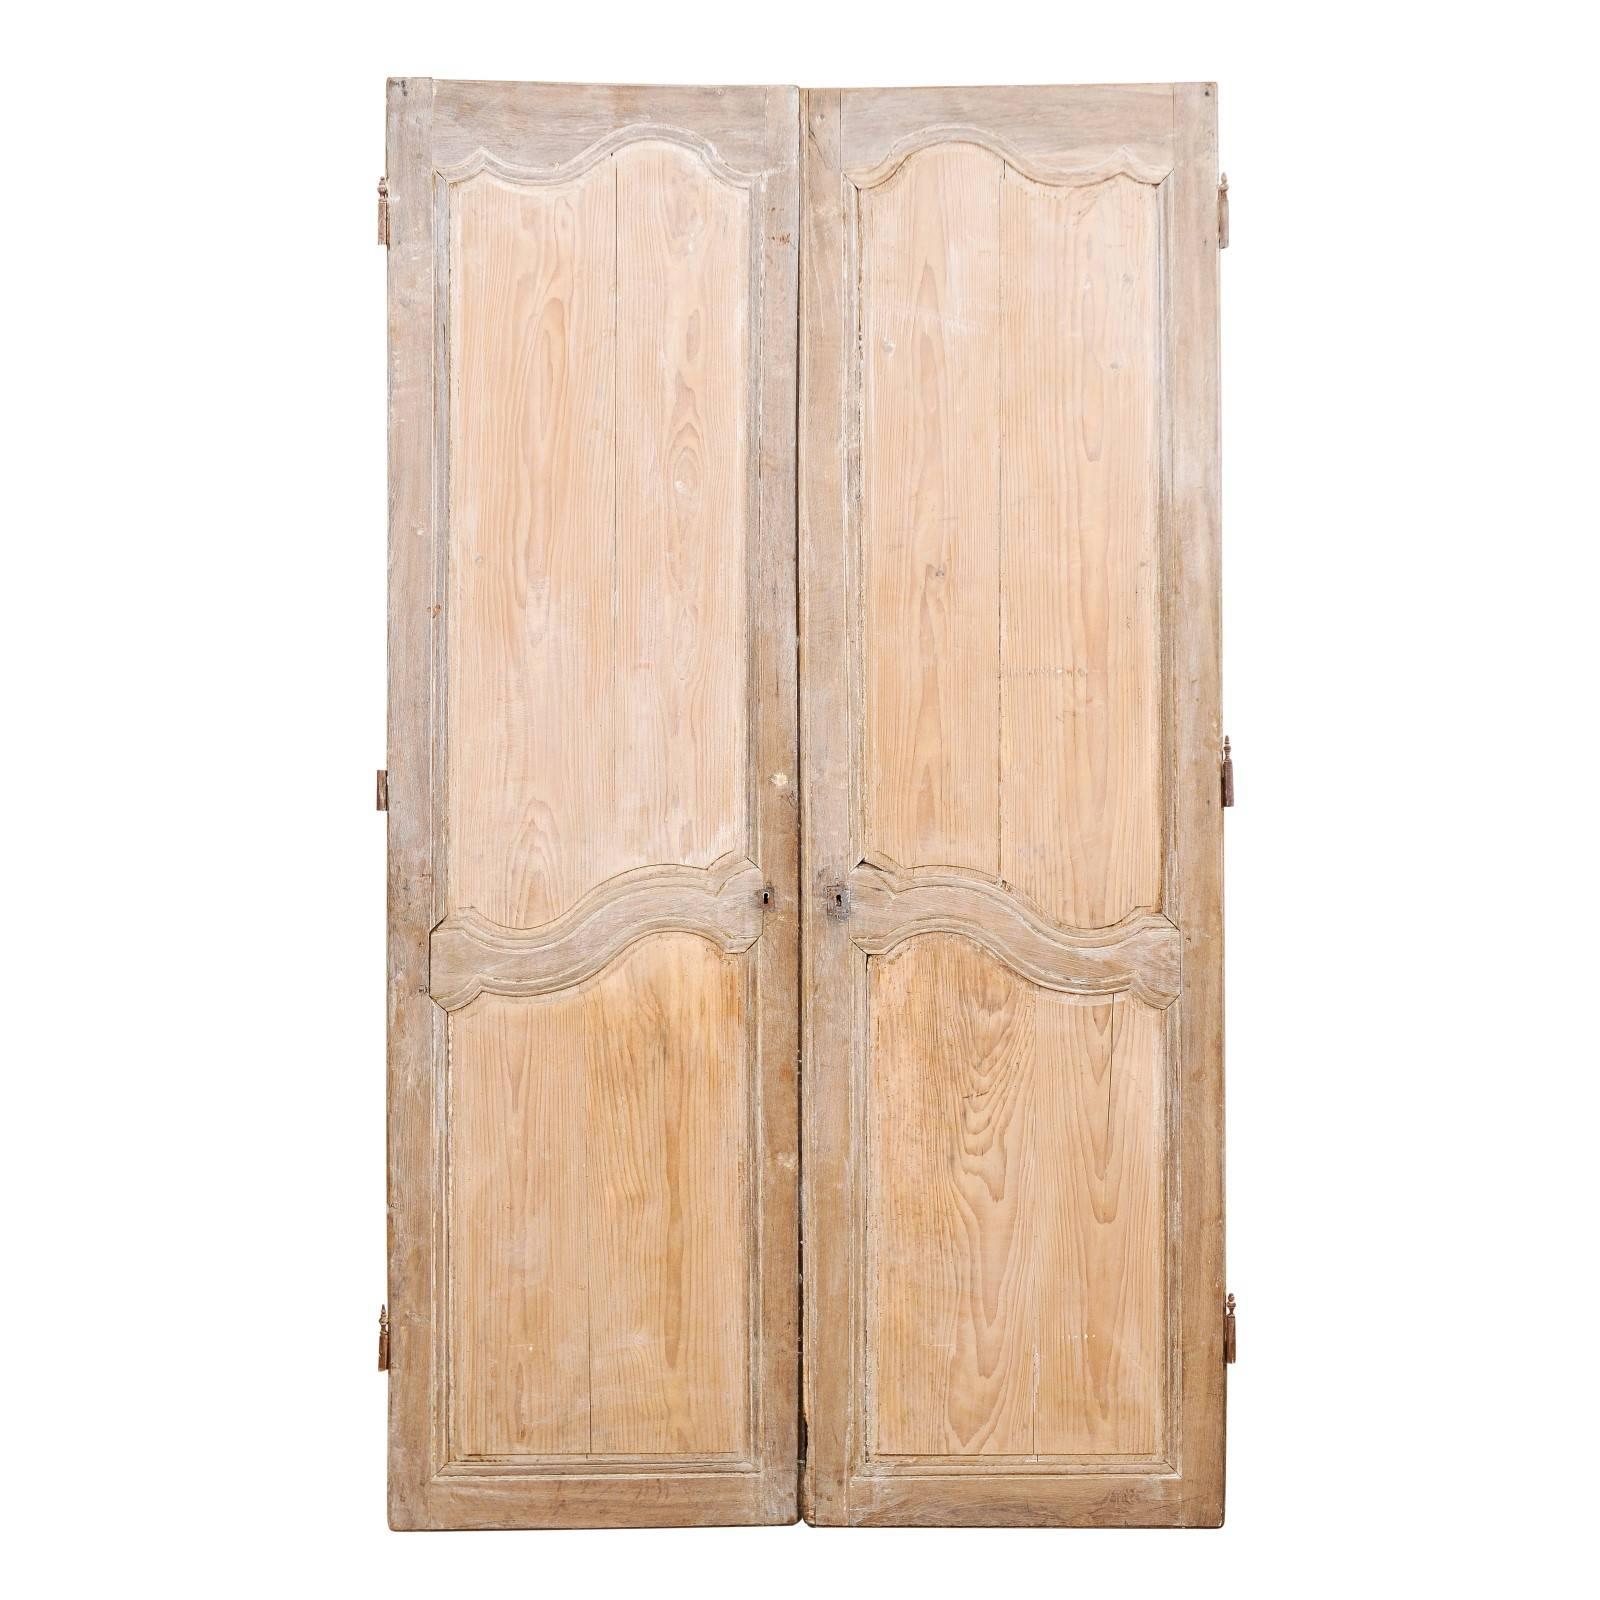 Pair of 19th Century Tall French Doors with a Light Wash of Paint